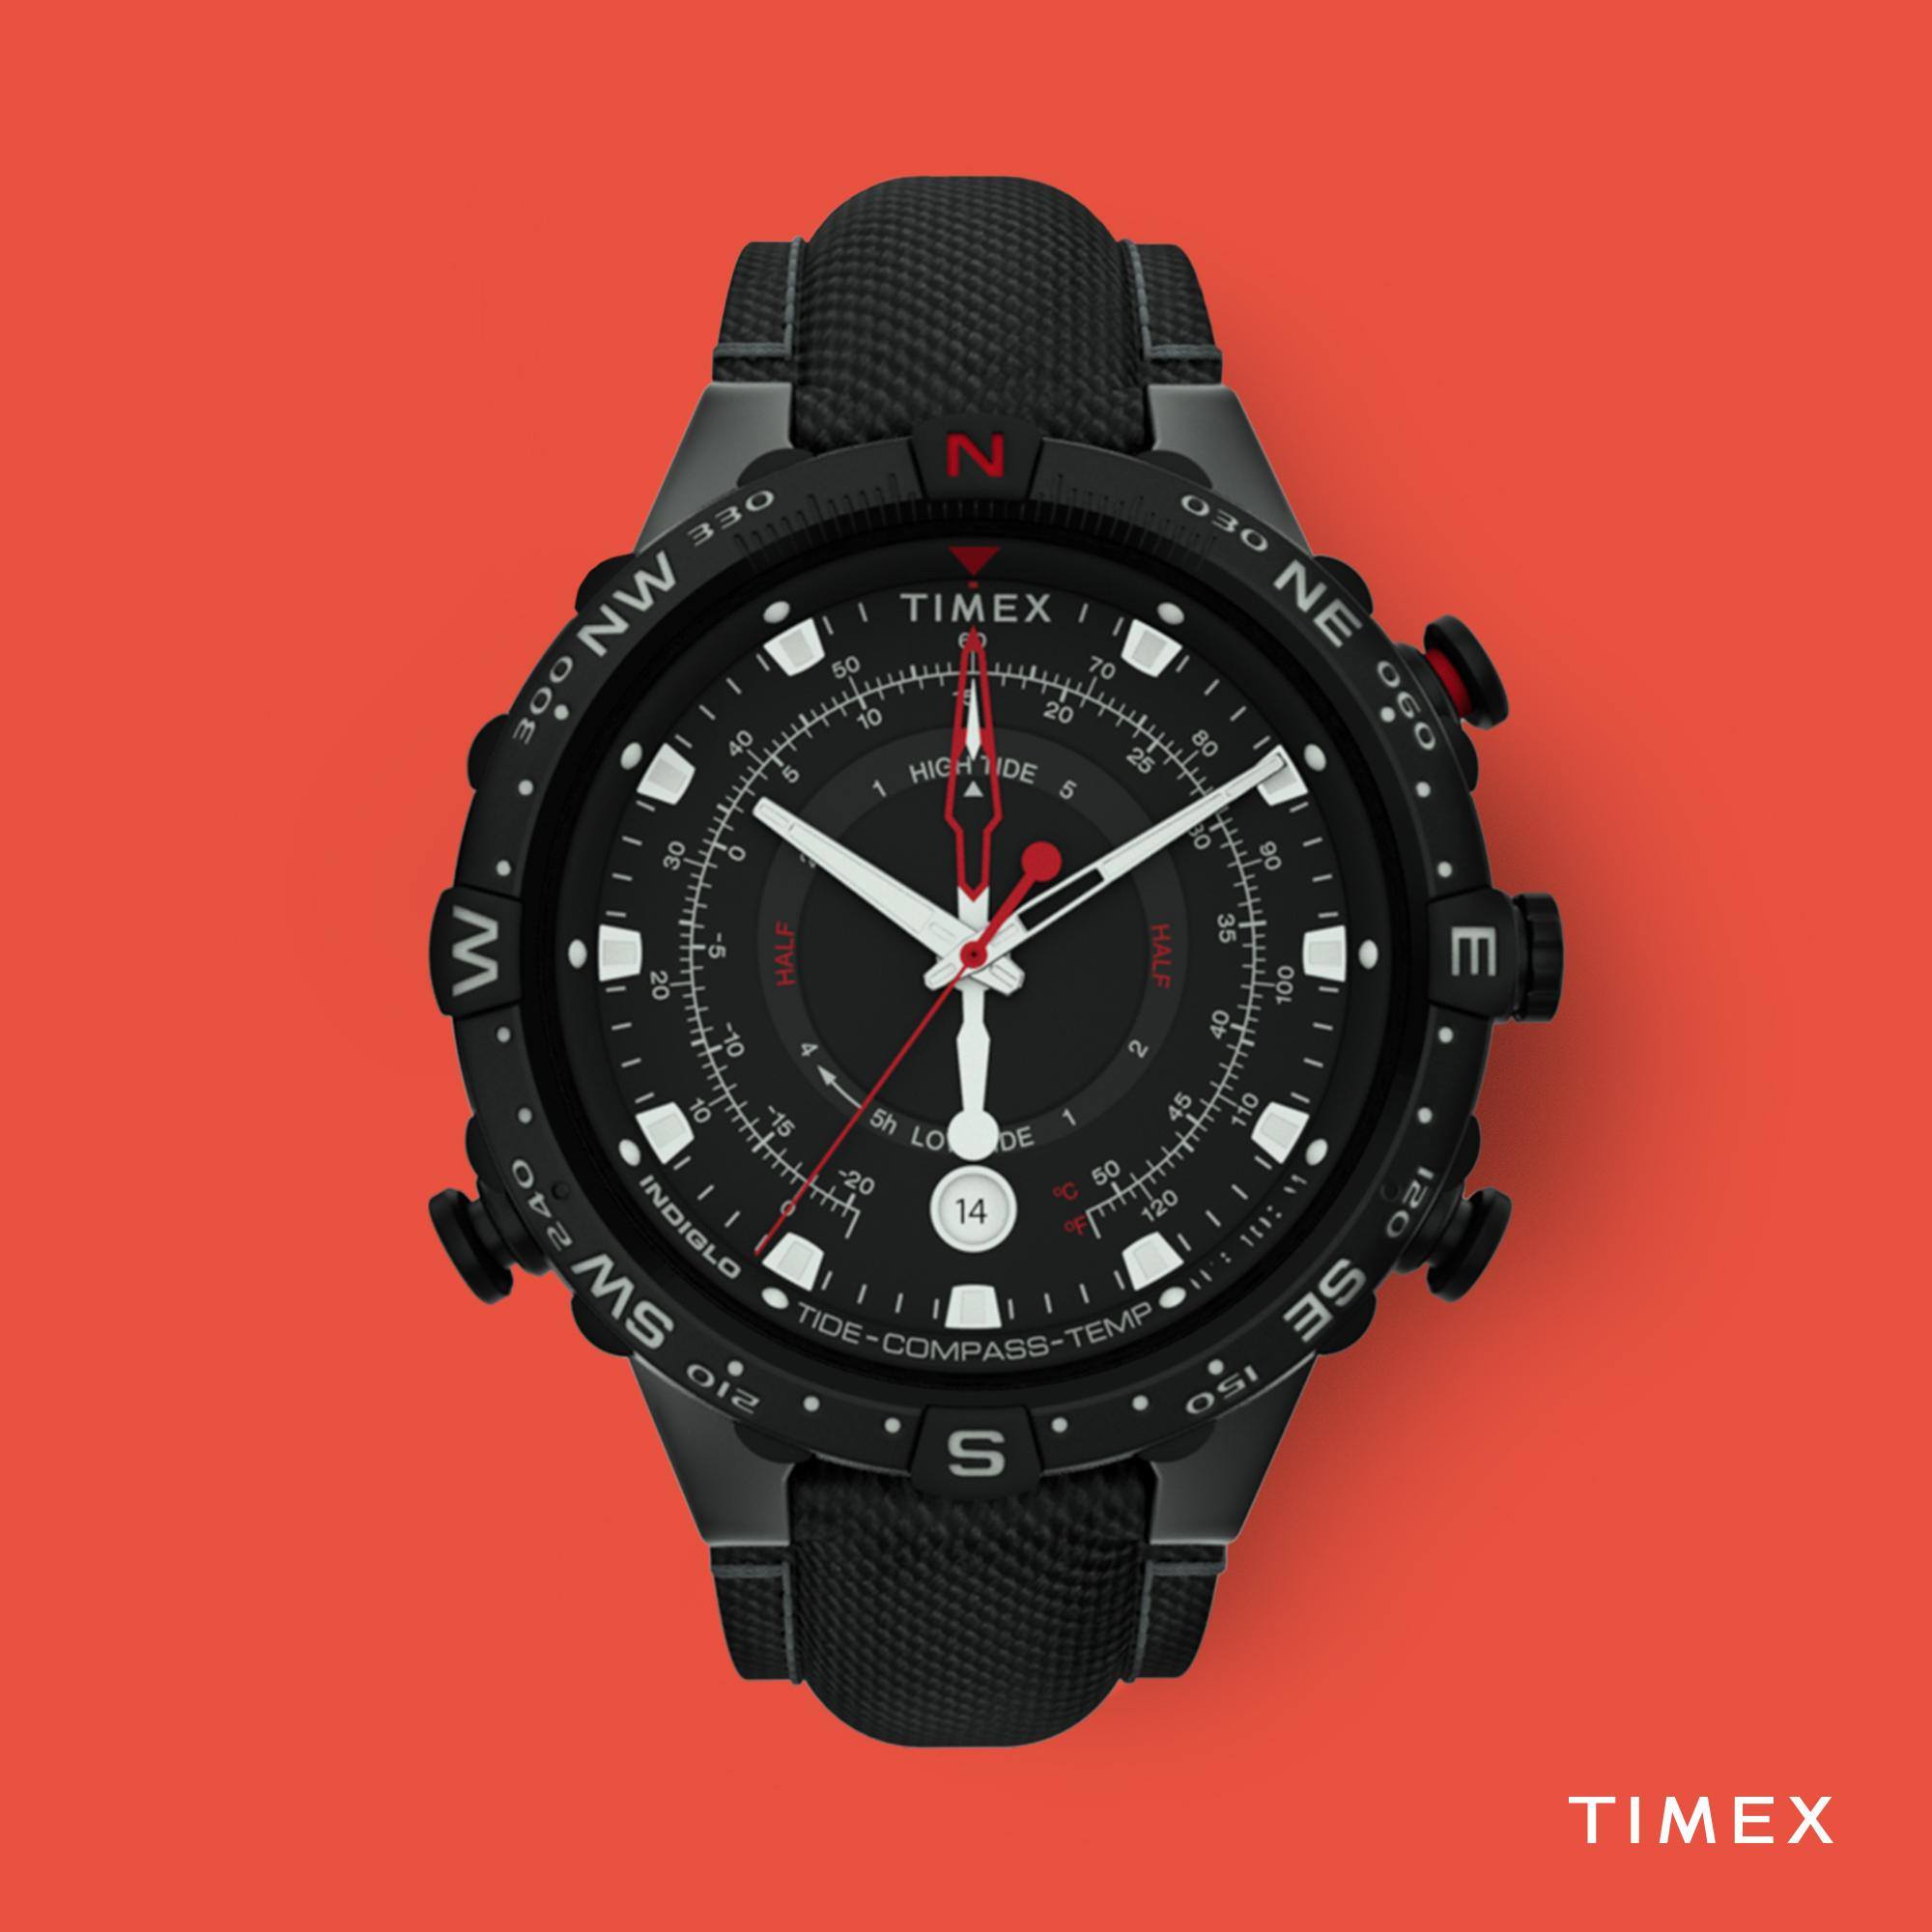 Timex's Allied Tide-Temp-Compass Is A Tough, Affordable Adventure